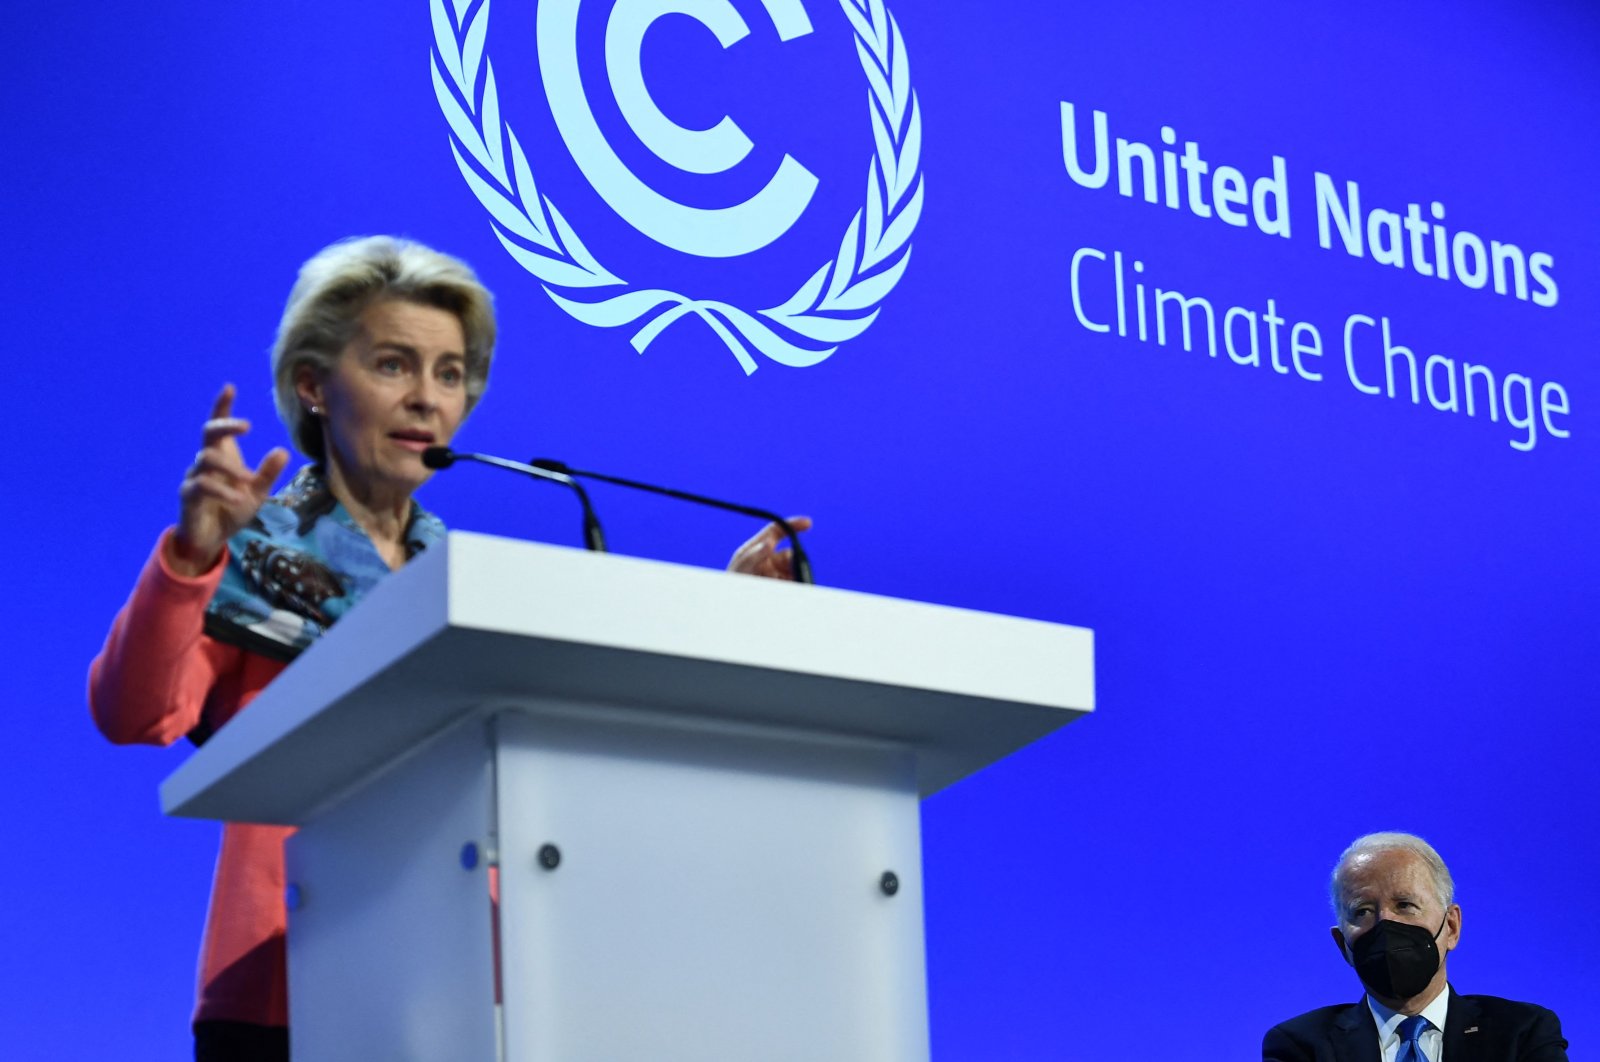 U.S. President Joe Biden (R) listens to European Commission President Ursula von der Leyen delivering a speech on stage during for a meeting as part of the United Nations Climate Conference (COP26), Glasgow, Scotland, Nov. 2, 2021. (AFP Photo)